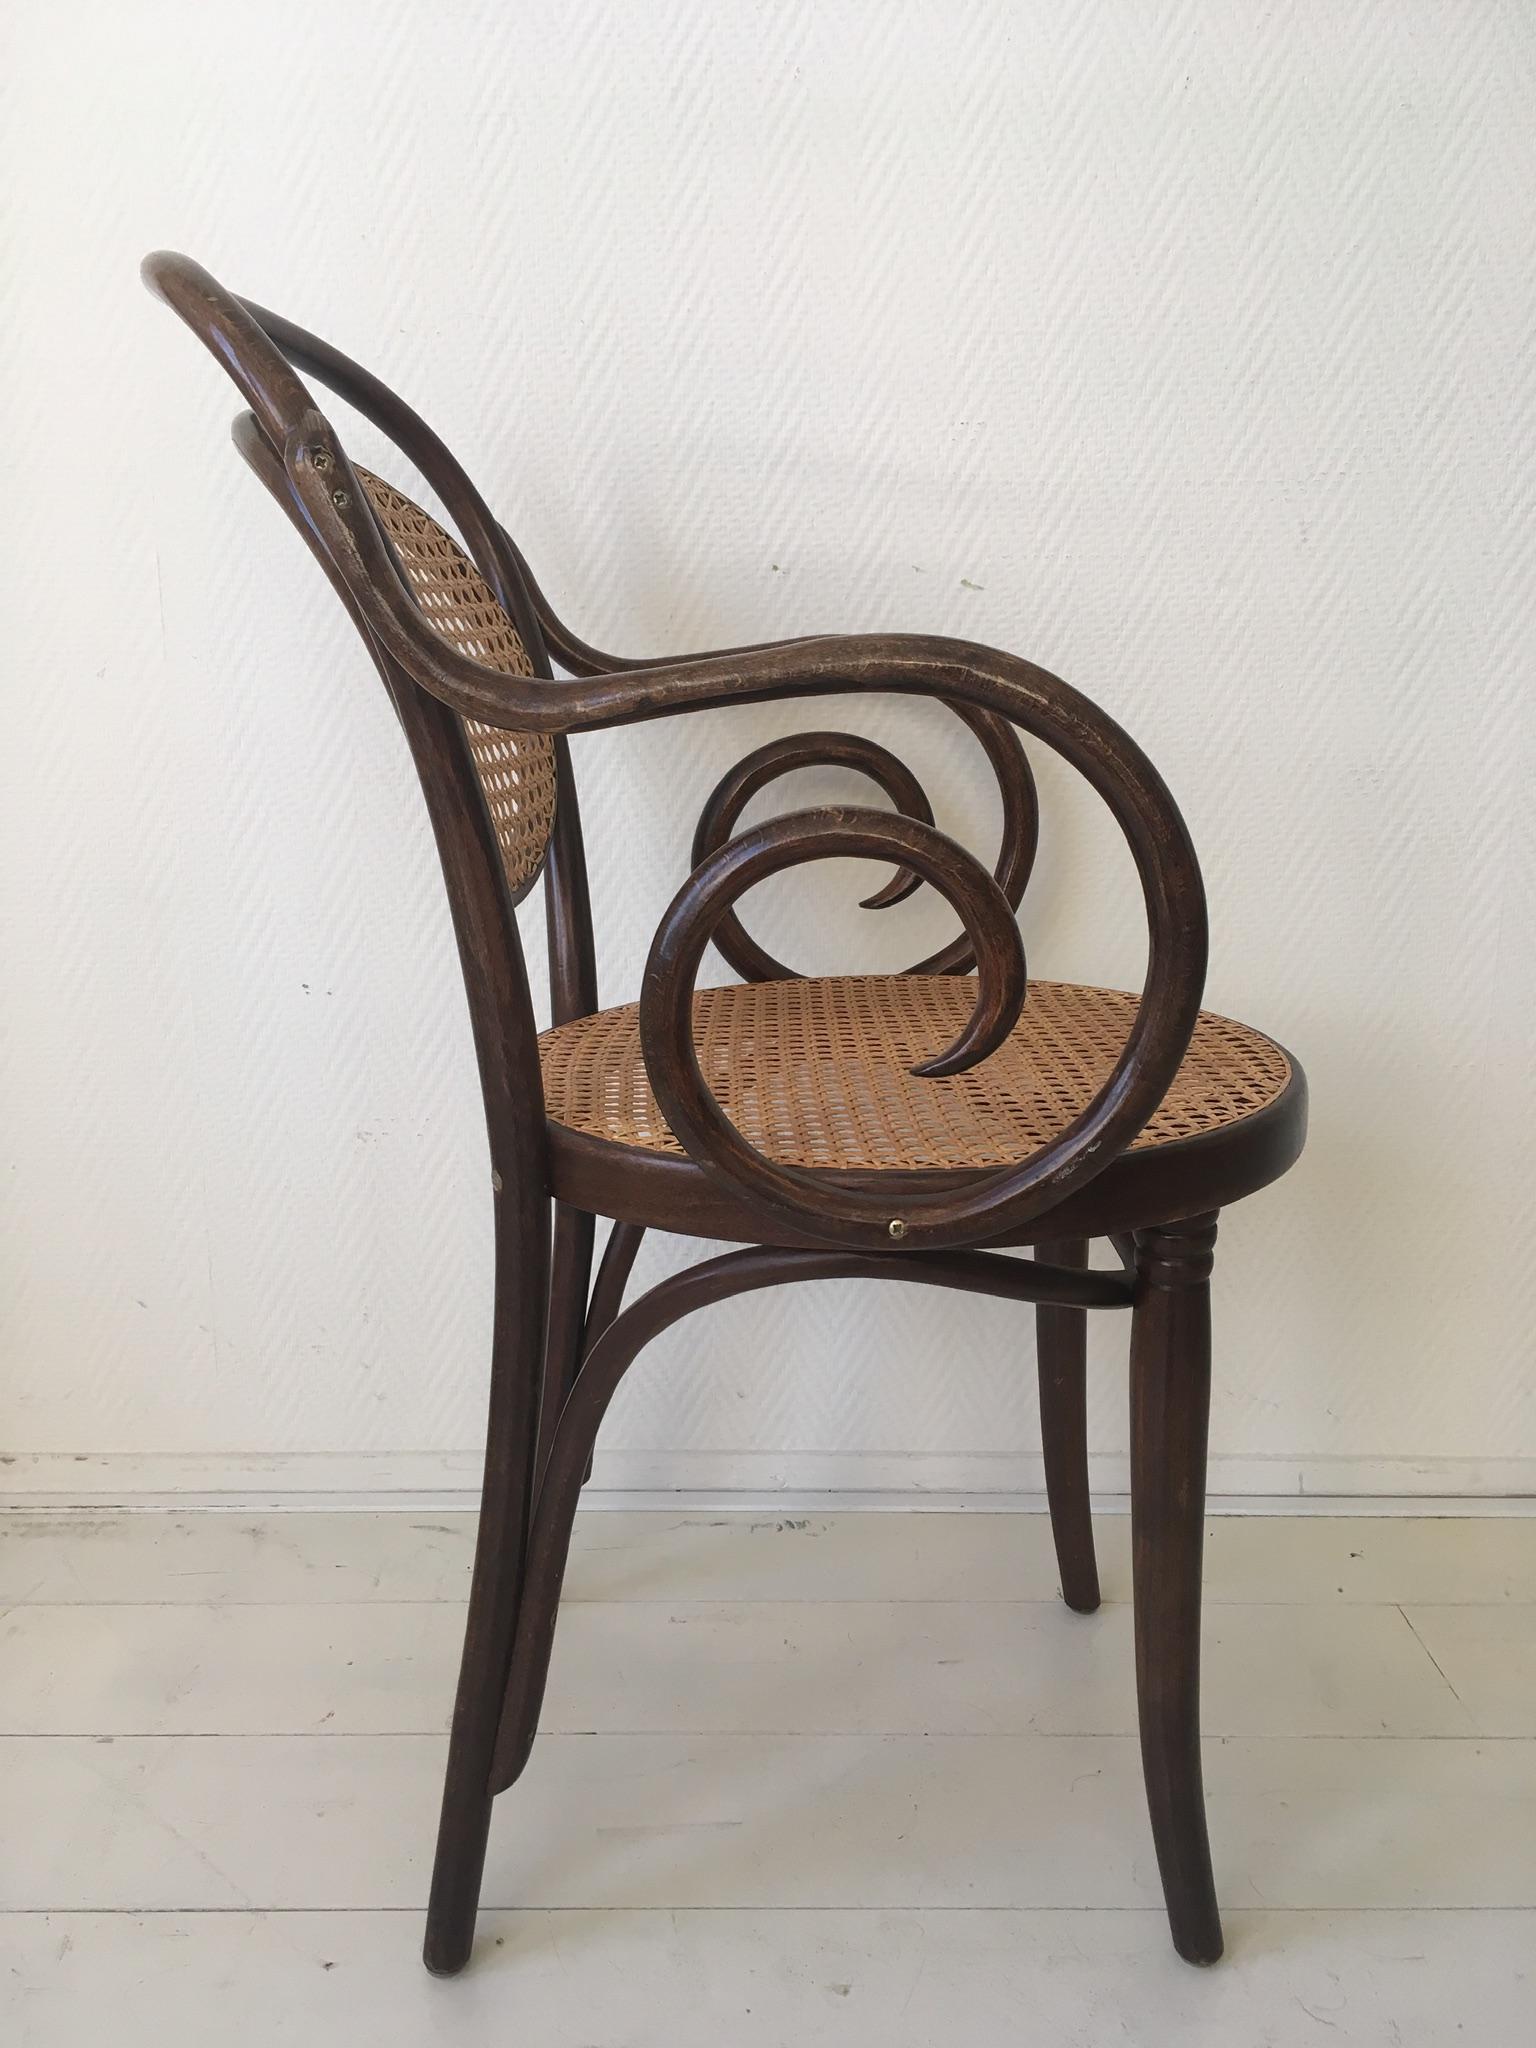 Hand-Woven ZPM Radomsko, Former Thonet, No. 11 Bentwood and Rattan Dining Room Chairs